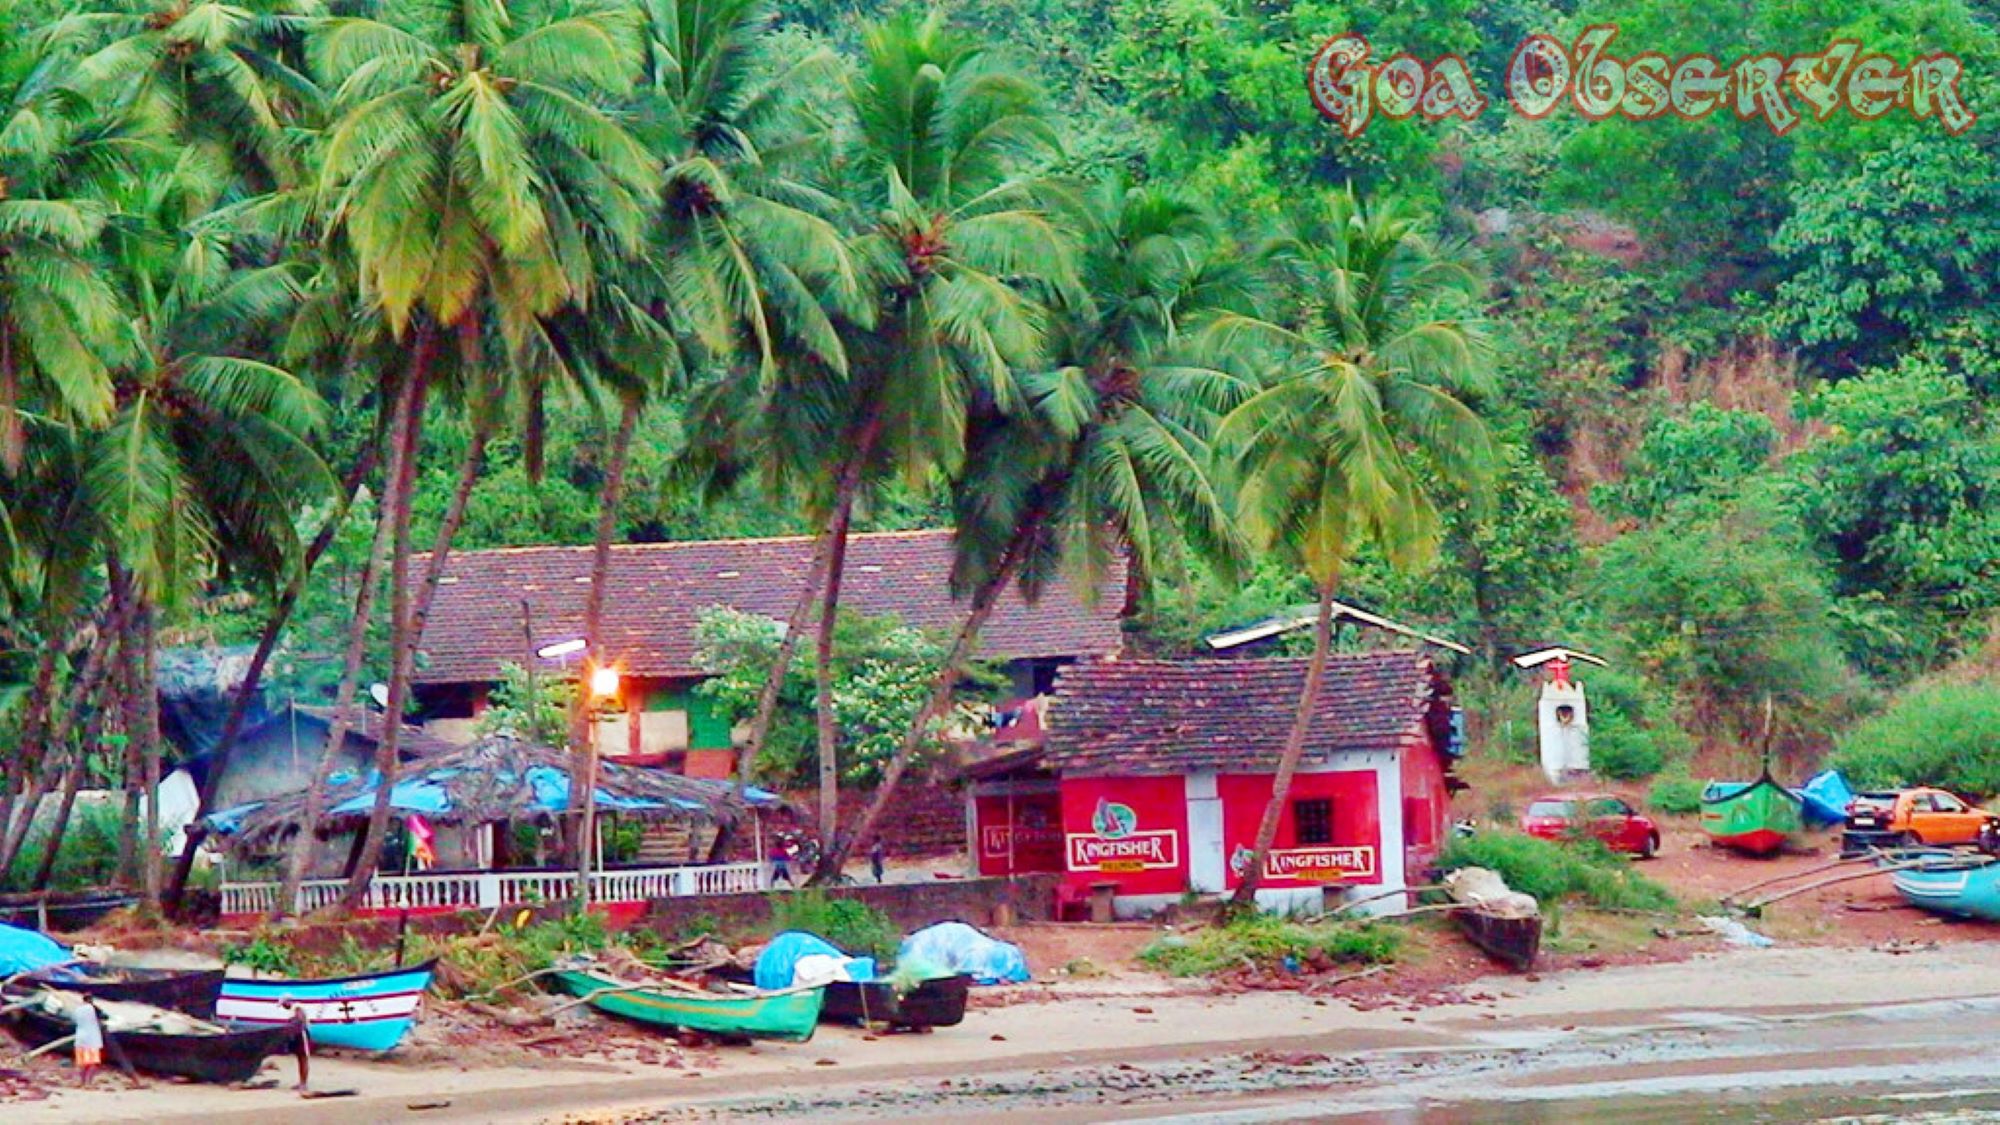 beach with a Schak, exotic vegetation, and boats